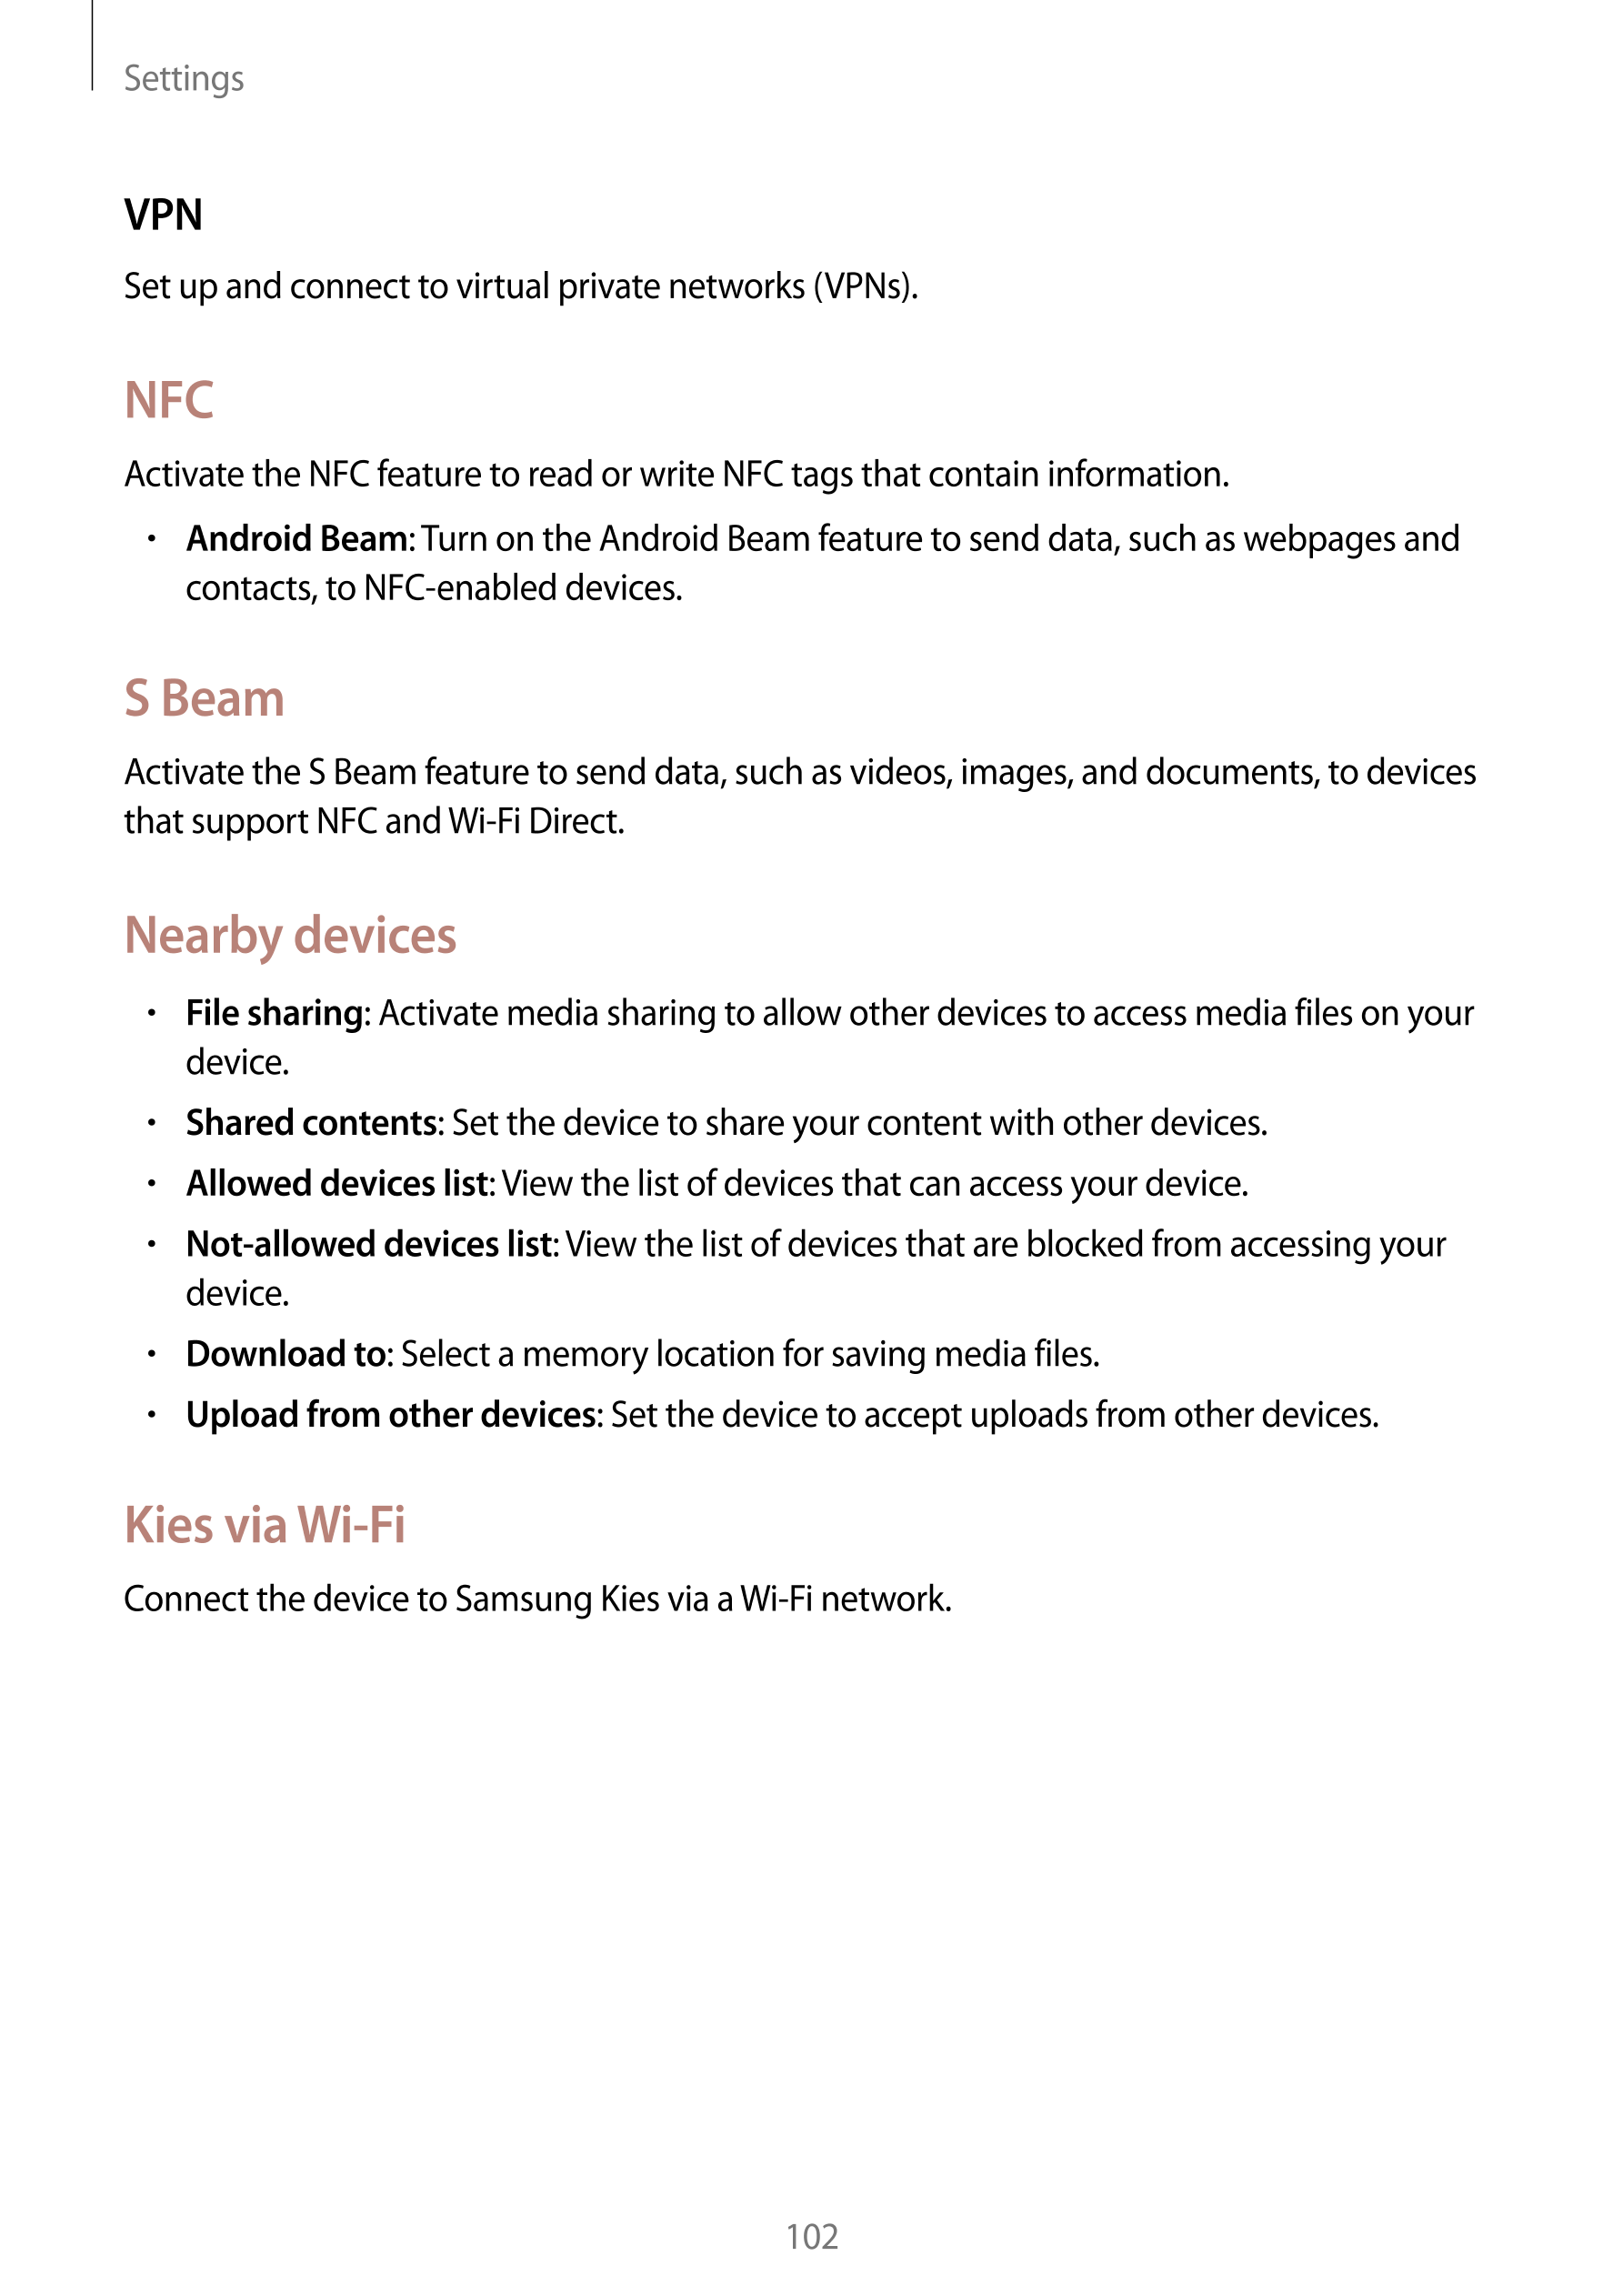 Settings
VPN
Set up and connect to virtual private networks (VPNs).
NFC
Activate the NFC feature to read or write NFC tags that 